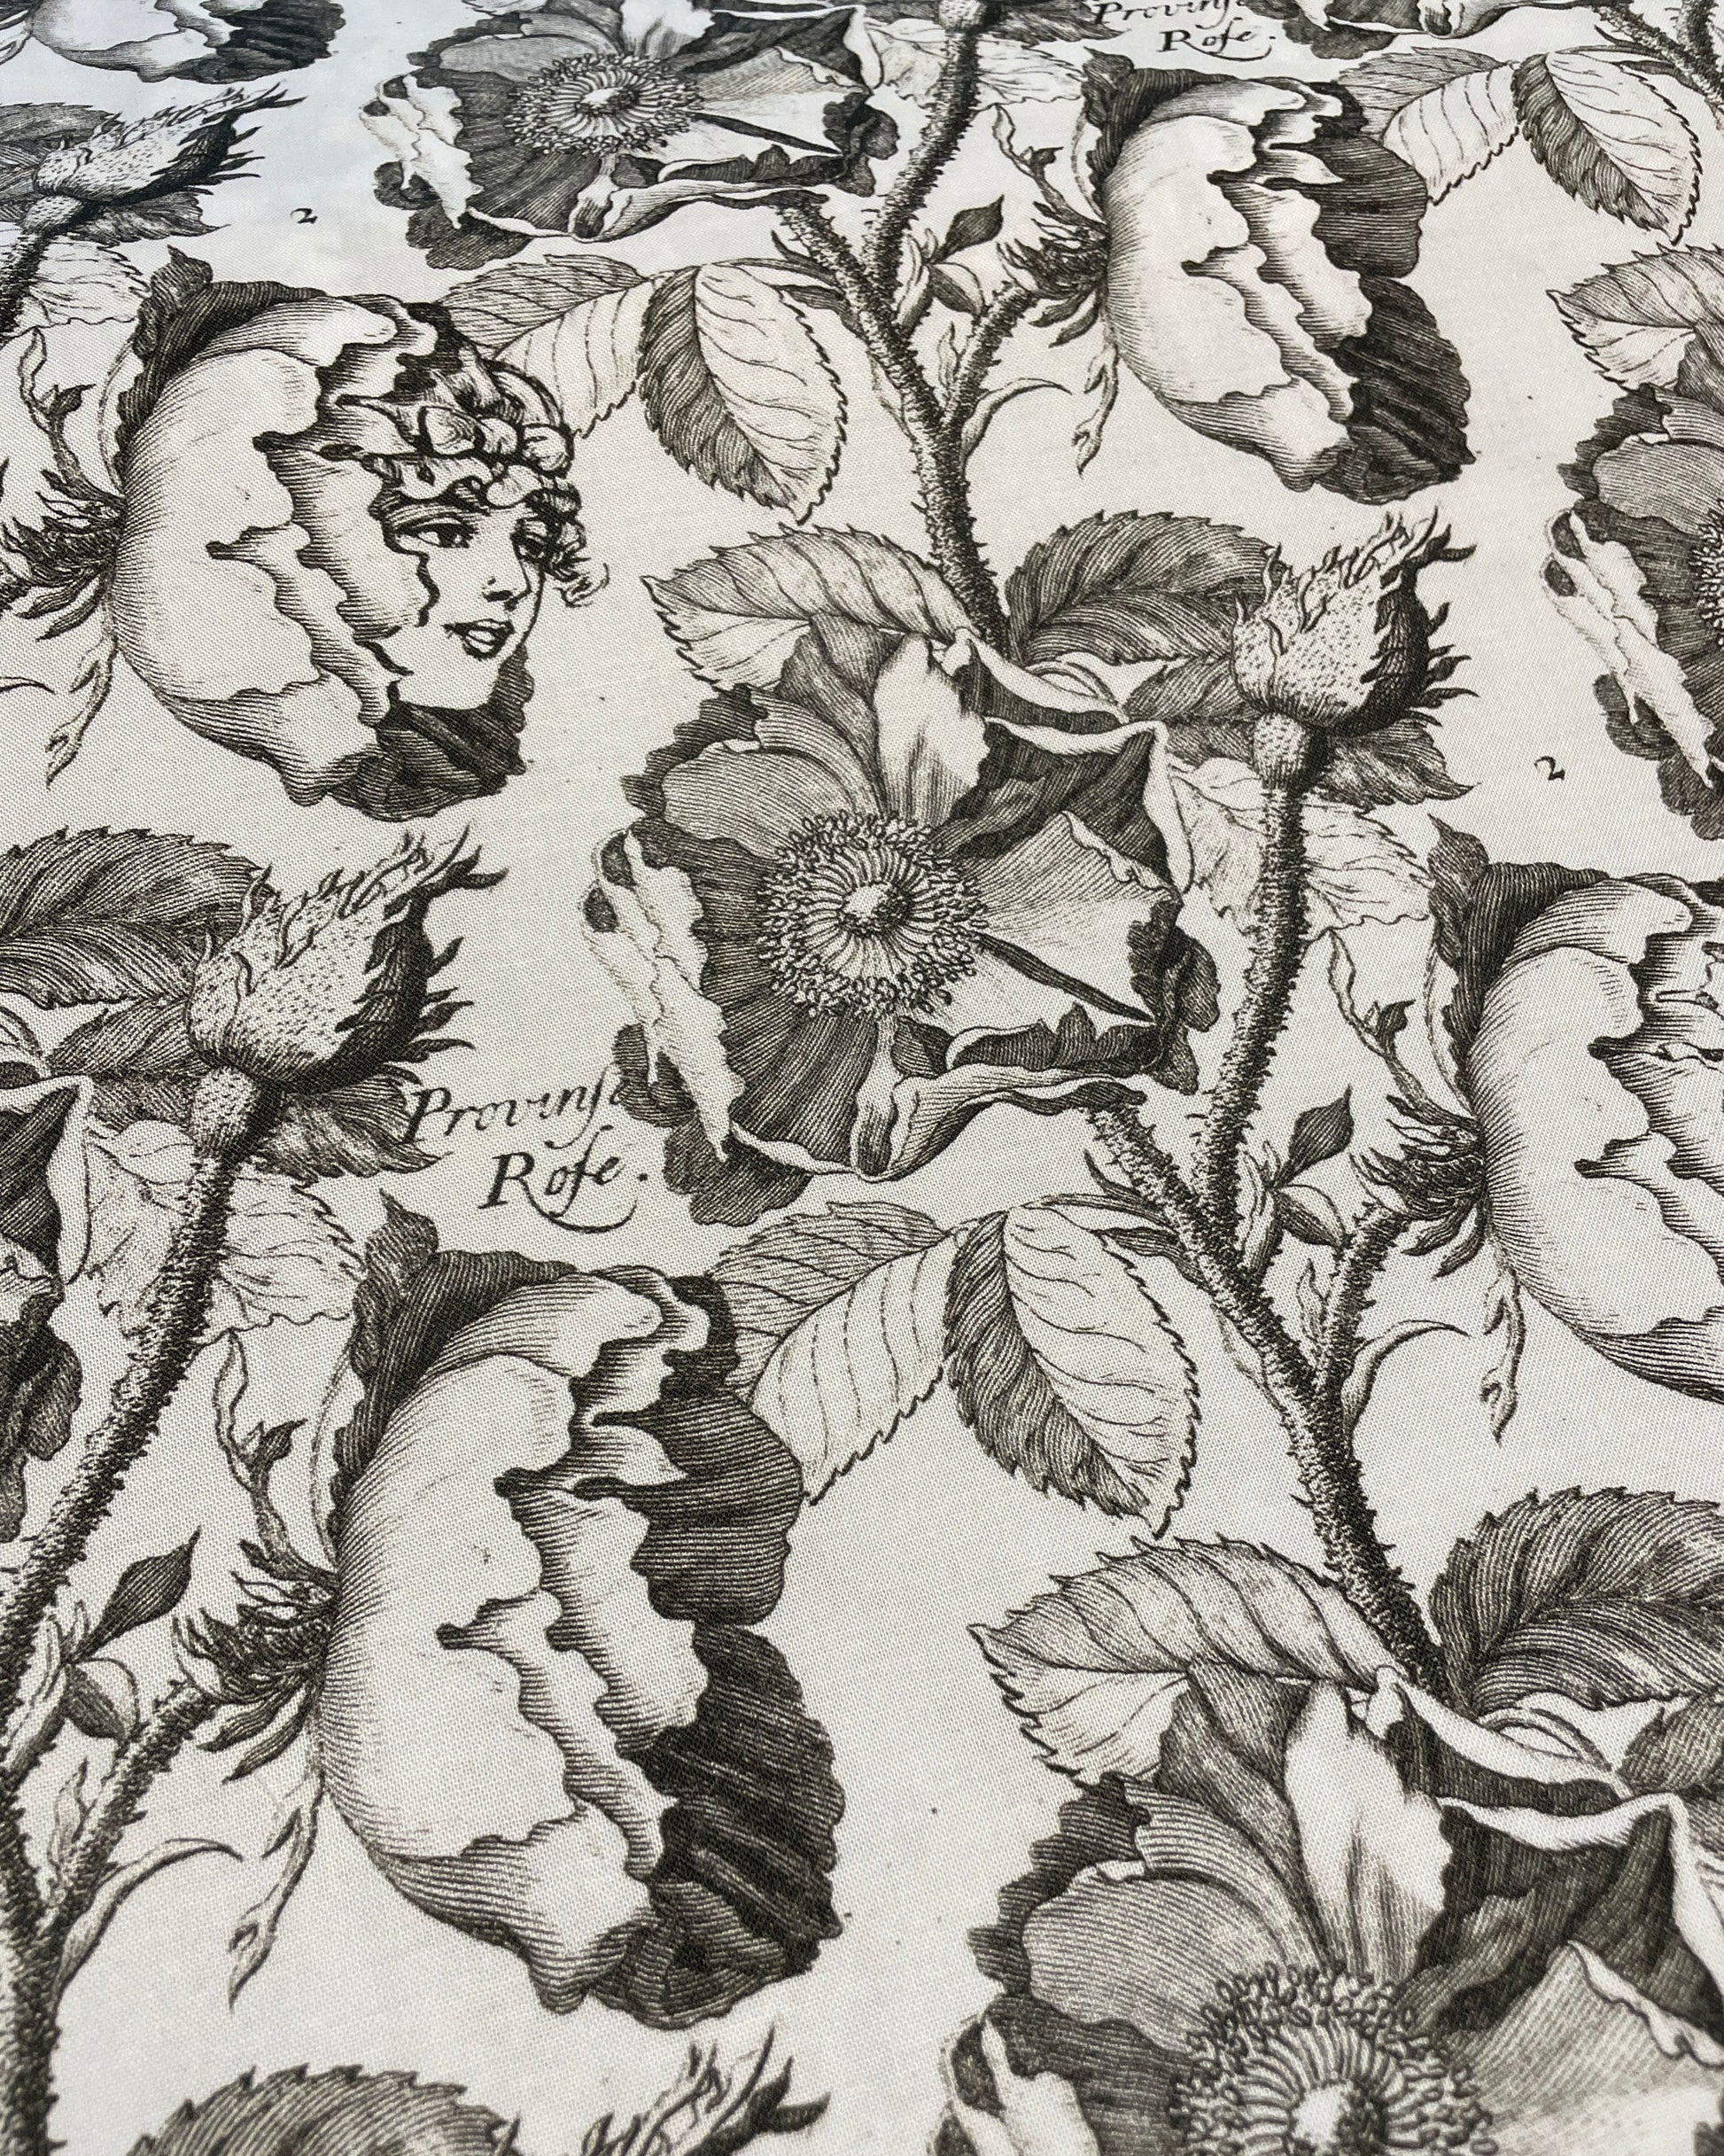 Black and white floral - Queen's Living Garden White - Mad Masquerade collection - Riley Blake - 100% Cotton Fabric - Alice in Wonderland